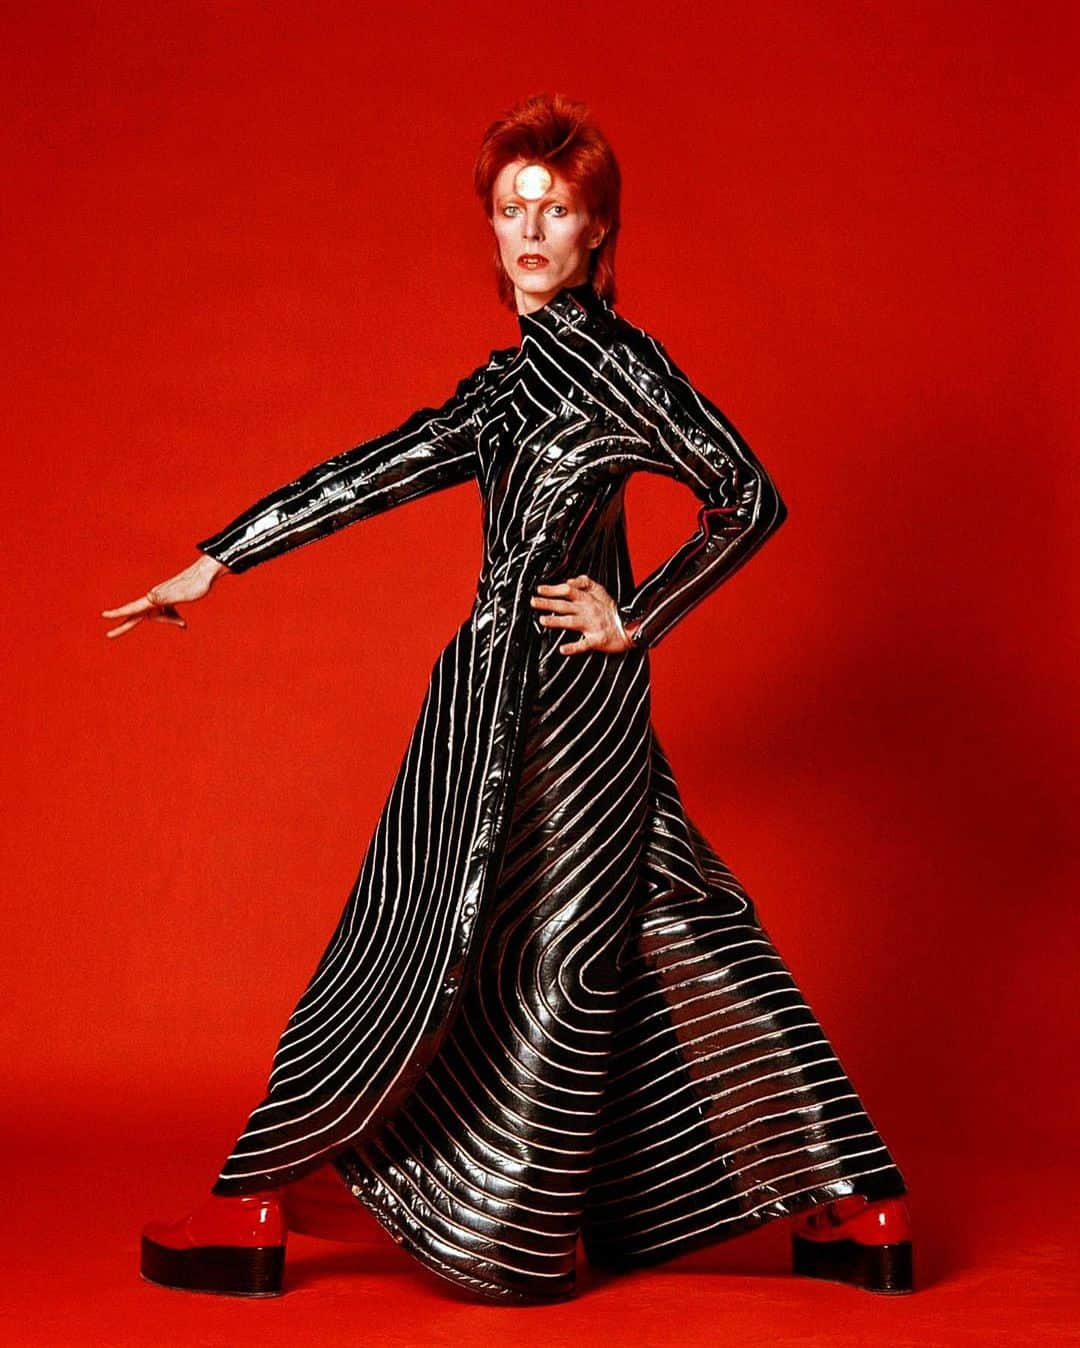 デヴィッド・ボウイさんのインスタグラム写真 - (デヴィッド・ボウイInstagram)「DAILY BOWIE THING – Day 79  “Sake and strange divine…”  On Thursday 5th April 1973, David Bowie and travelling companion, Geoff MacCormack, docked at Yokohama in Japan aboard the SS Oronsay. Slide #1 in our slideshow was taken during a press conference at Imperial Hotel, Tokyo, the following day, as were slides #4 & #10, © Koh Hasebe / Shinko Music Archive.  To coincide with David’s 8-date mini tour of Japan (his first in Japan), RCA issued two promotional albums in the shape of the compilation ROCK 'N' ROLL NOW and Aladdin Sane. They are pictured on slide #2 along with a flier for the Tokyo shows and a press advert.   Brian Ward’s 1972 Ziggy 'Droog' picture was prominent on the albums and in the associated advertising, along with his Ziggy 'hi-kick' photograph which had graced the front of RCA’s 1972 re-issue of The Man Who Sold The World.  Japanese journalists were given a beautiful press kit housed in the paper envelope pictured on slide #3. The kit contained folded versions of the two colour posters (behind David in slide #4), featuring shots taken by Masayoshi Sukita. The two black & white 10x8 promo photos on slide #5 utilising the same shots were also in the press kit.   The live shot from the tour on slide #6 features in Bowie and Sukita’s incredible Speed Of Life book, issued by Genesis Publications in 2012, as does the photo taken in February 1973, at RCA Studios in New York, on slide #7. One of the colour posters also featured a shot from this session.   Slide #8 is the cover of an A4, 28-page, promo booklet included in the press kit. We’re not sure if this was available commercially on the tour too, though there was also a lavish official Japanese colour tour programme. Anybody out there know?   The single-sided leaflet on slide #9 was contained in the kit as were several pages of tour itineraries and other information.   As you've no doubt guessed, this press kit is very rare and just never shows up these days, though the booklet on slide #8 does turn up every now and again.  #DailyBowieThing  #BowiePressKit  #BowiePromoPhotos  #BowieJapan」1月25日 10時04分 - davidbowie